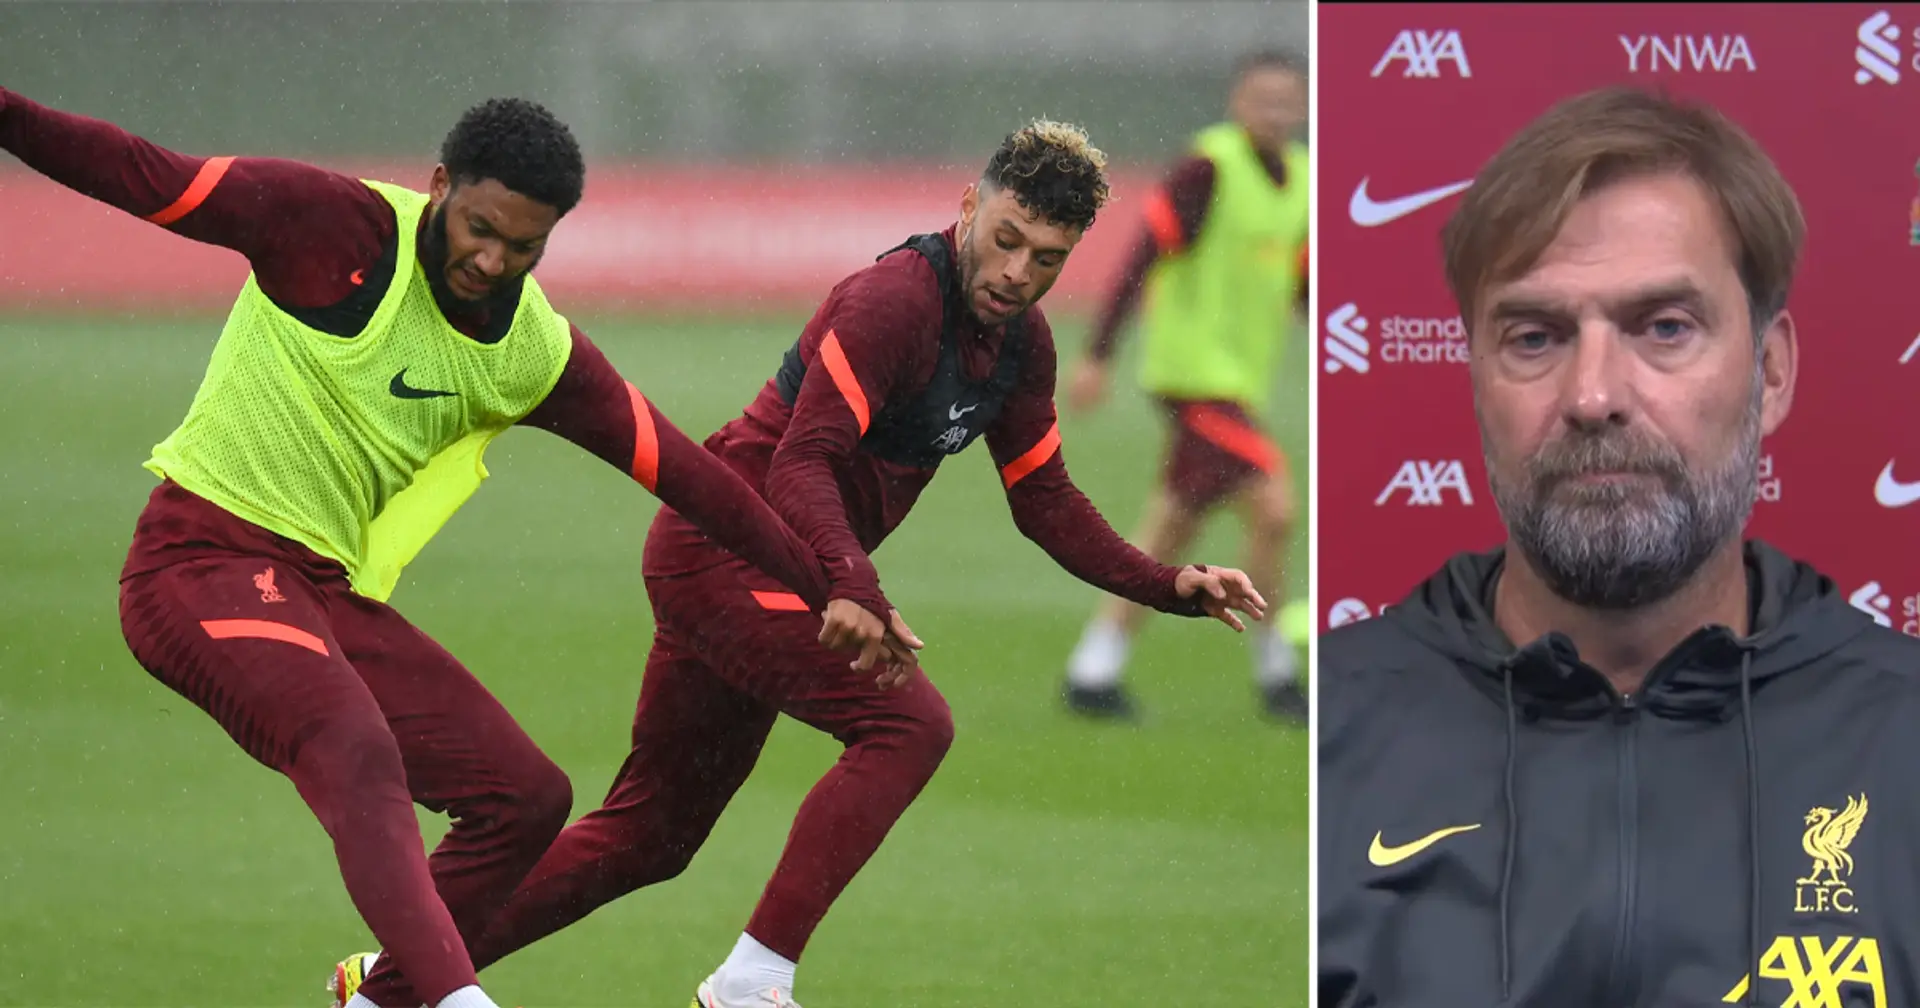 'They had Covid last week': Klopp issues update on Gomez and Oxlade-Chamberlain ahead of Leicester game